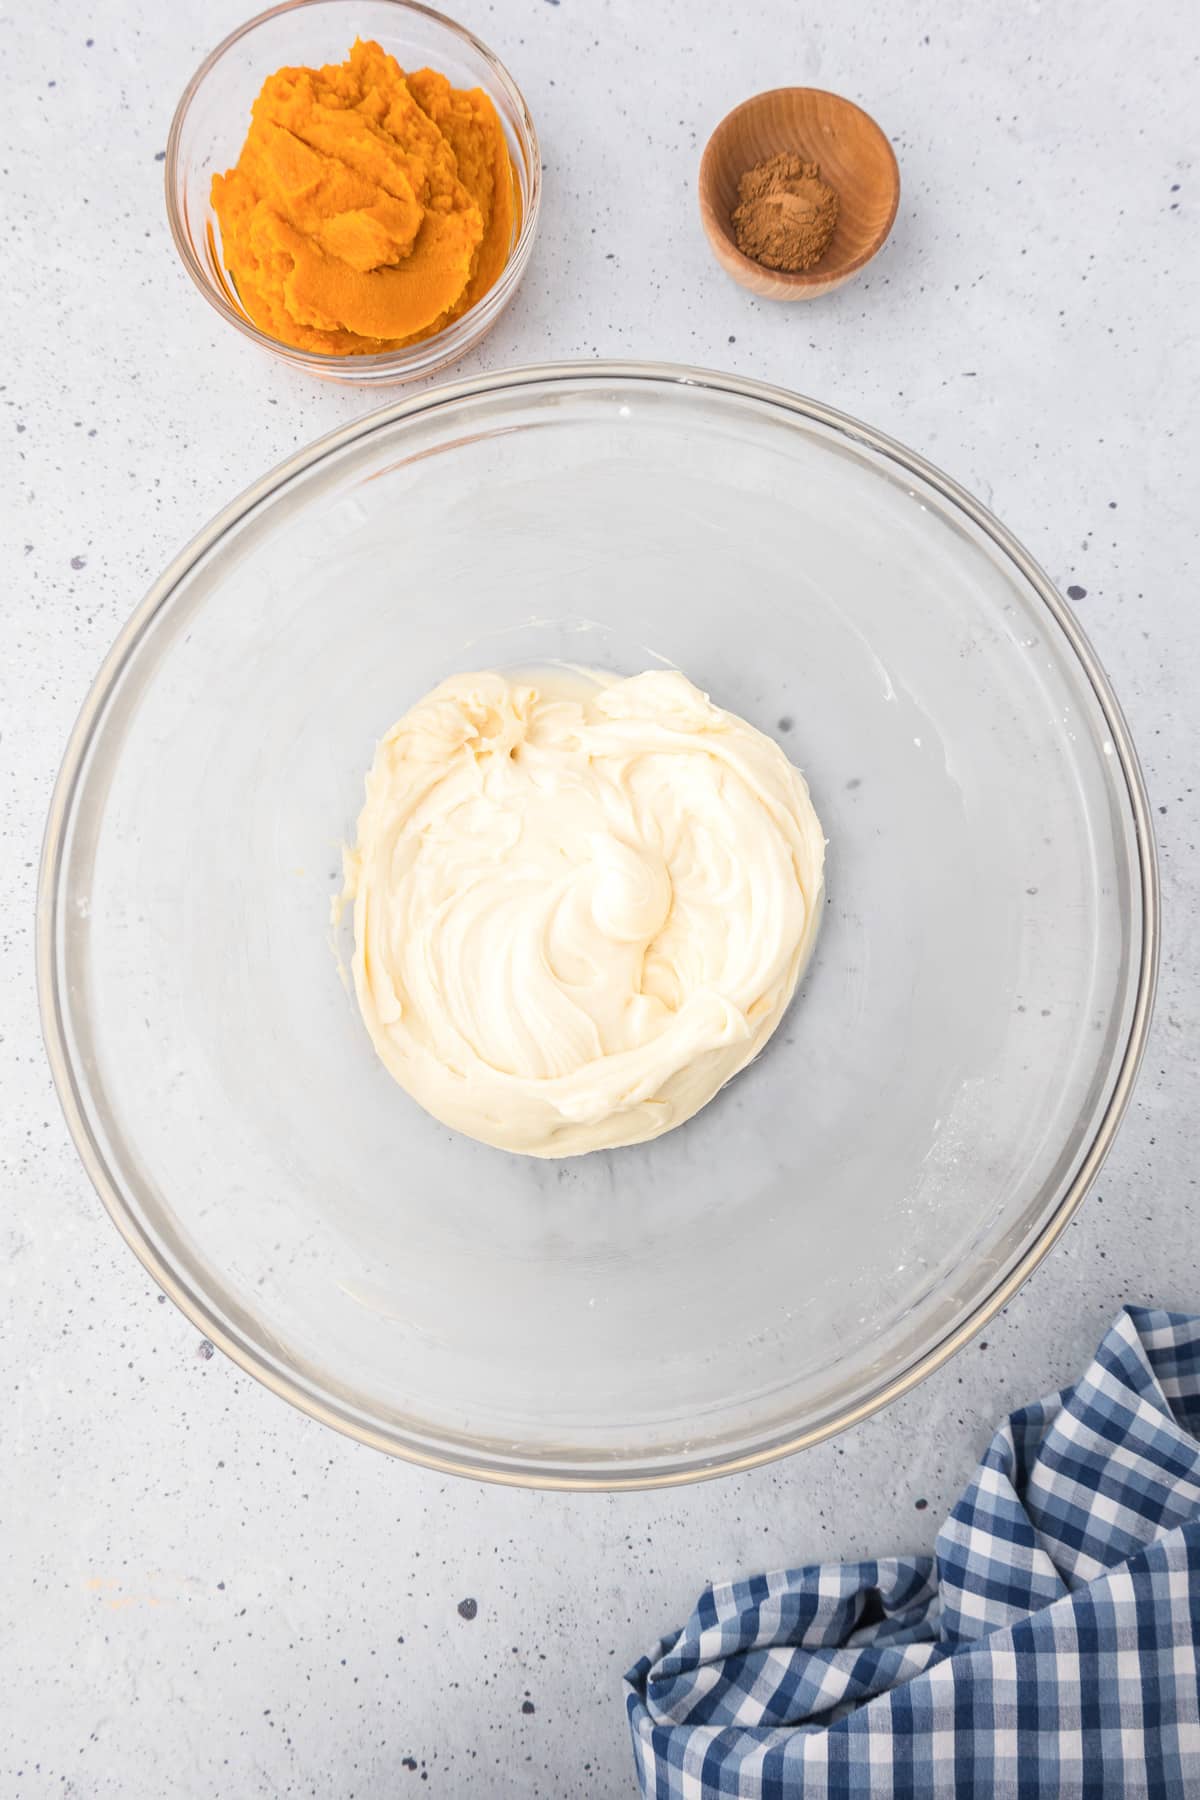 Cream cheese mixture in a bowl with pumpkin and pumpkin pie spice in bowls nearby on the counter from overhead.